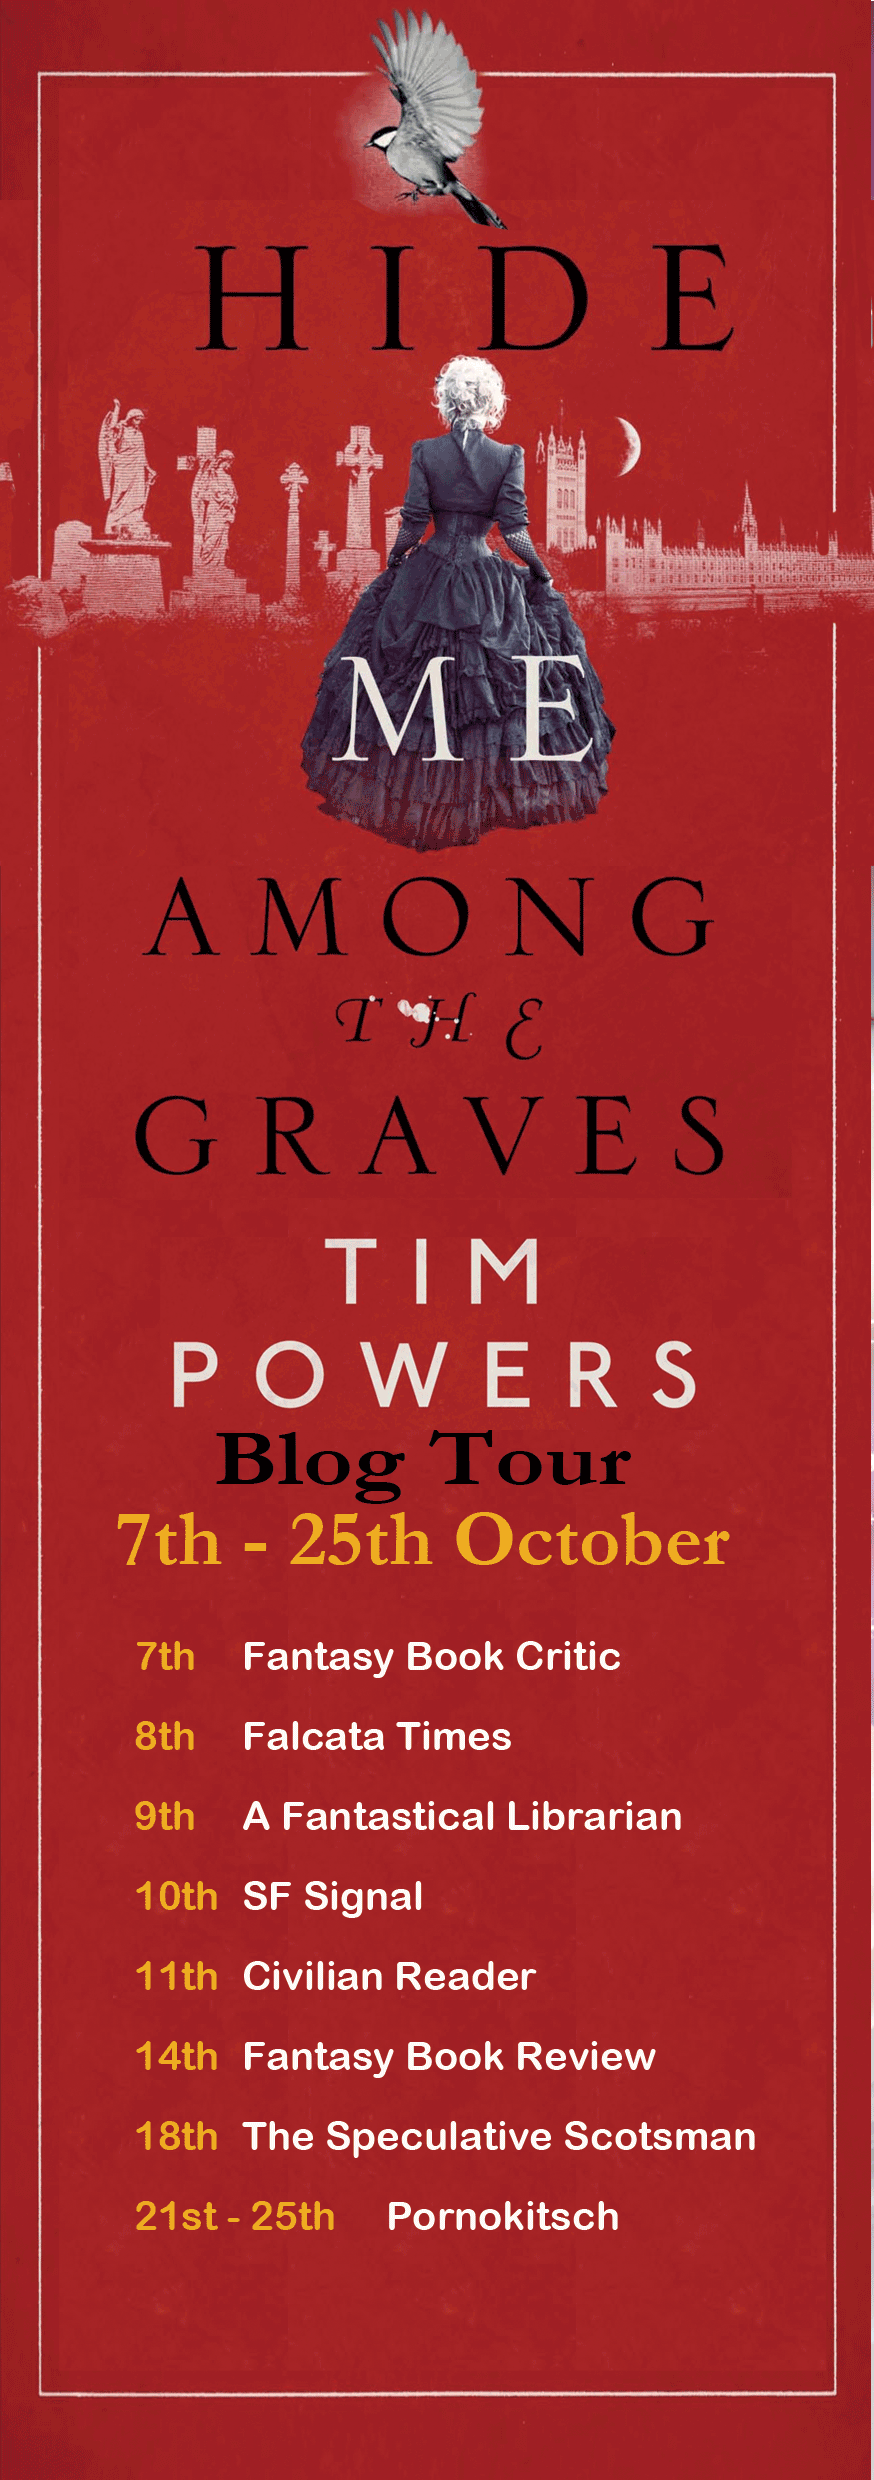 TimPowers-BlogTour2